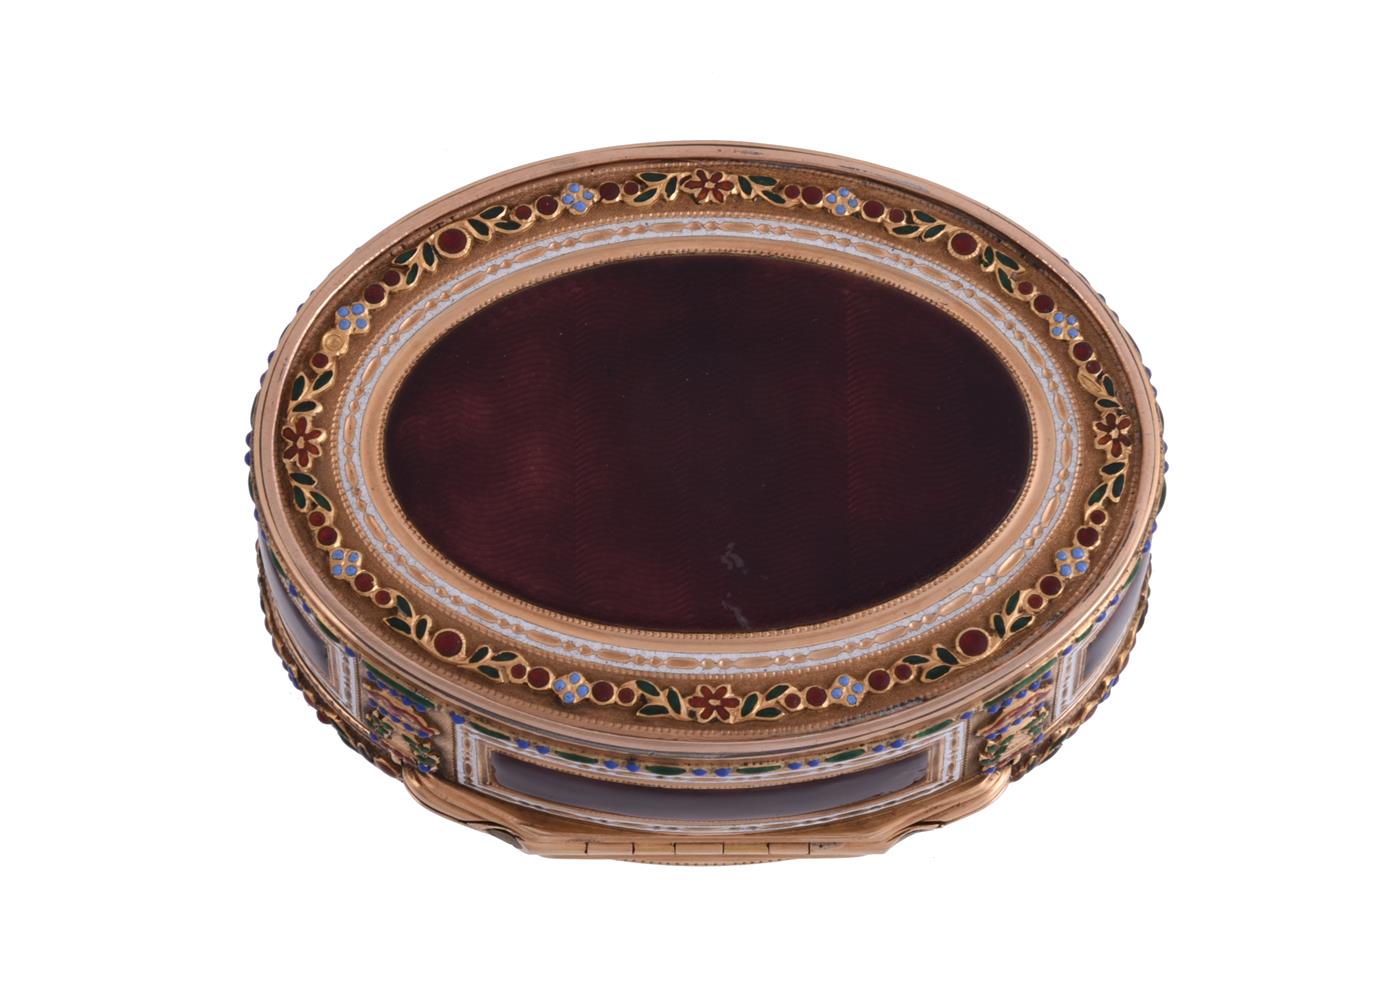 AN 18TH CENTURY GOLD AND ENAMEL OVAL BOX - Image 4 of 7